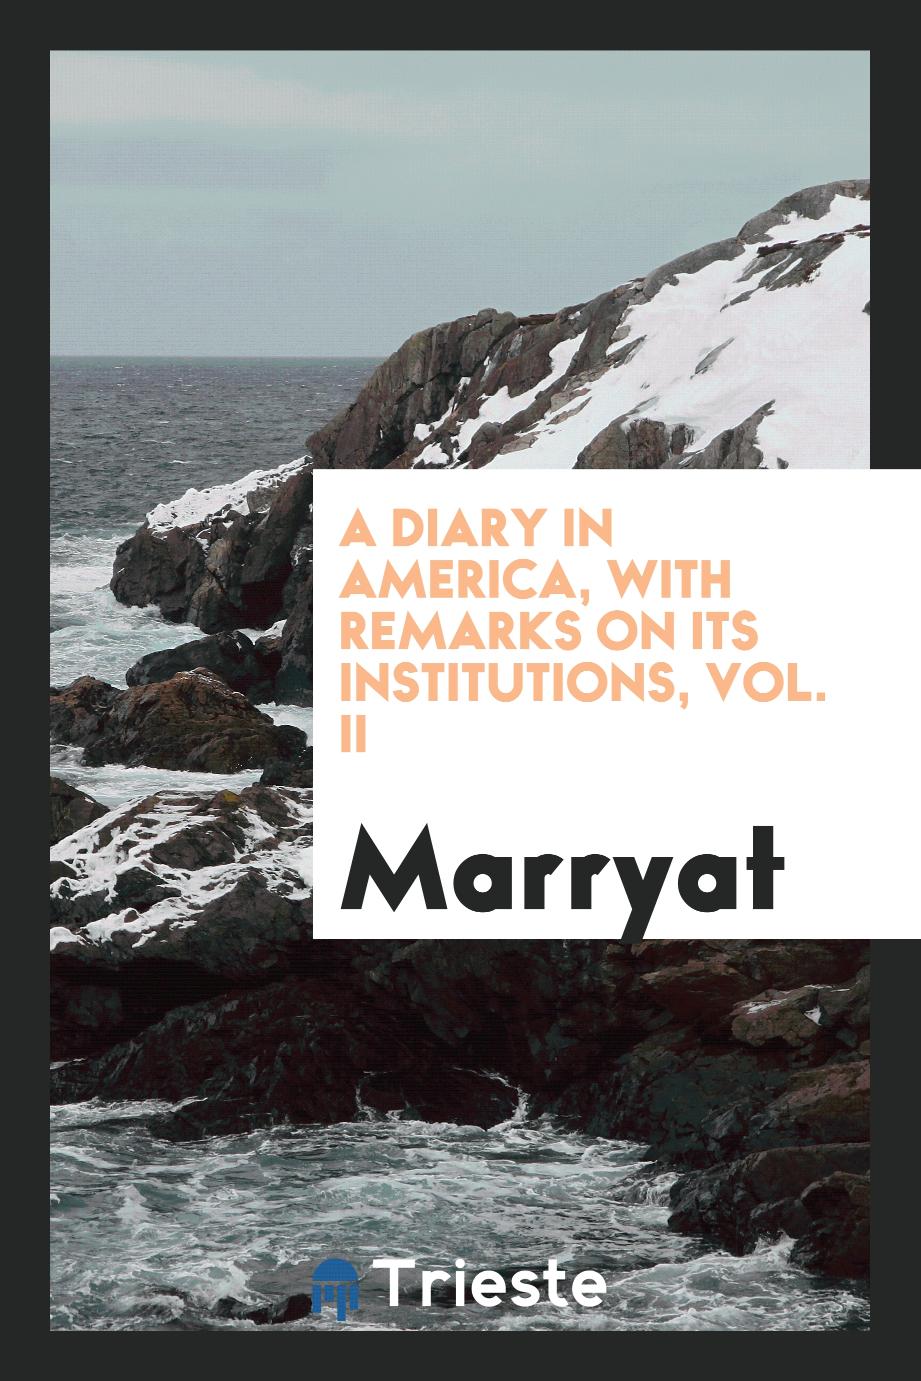 A diary in America, with remarks on its institutions, Vol. II